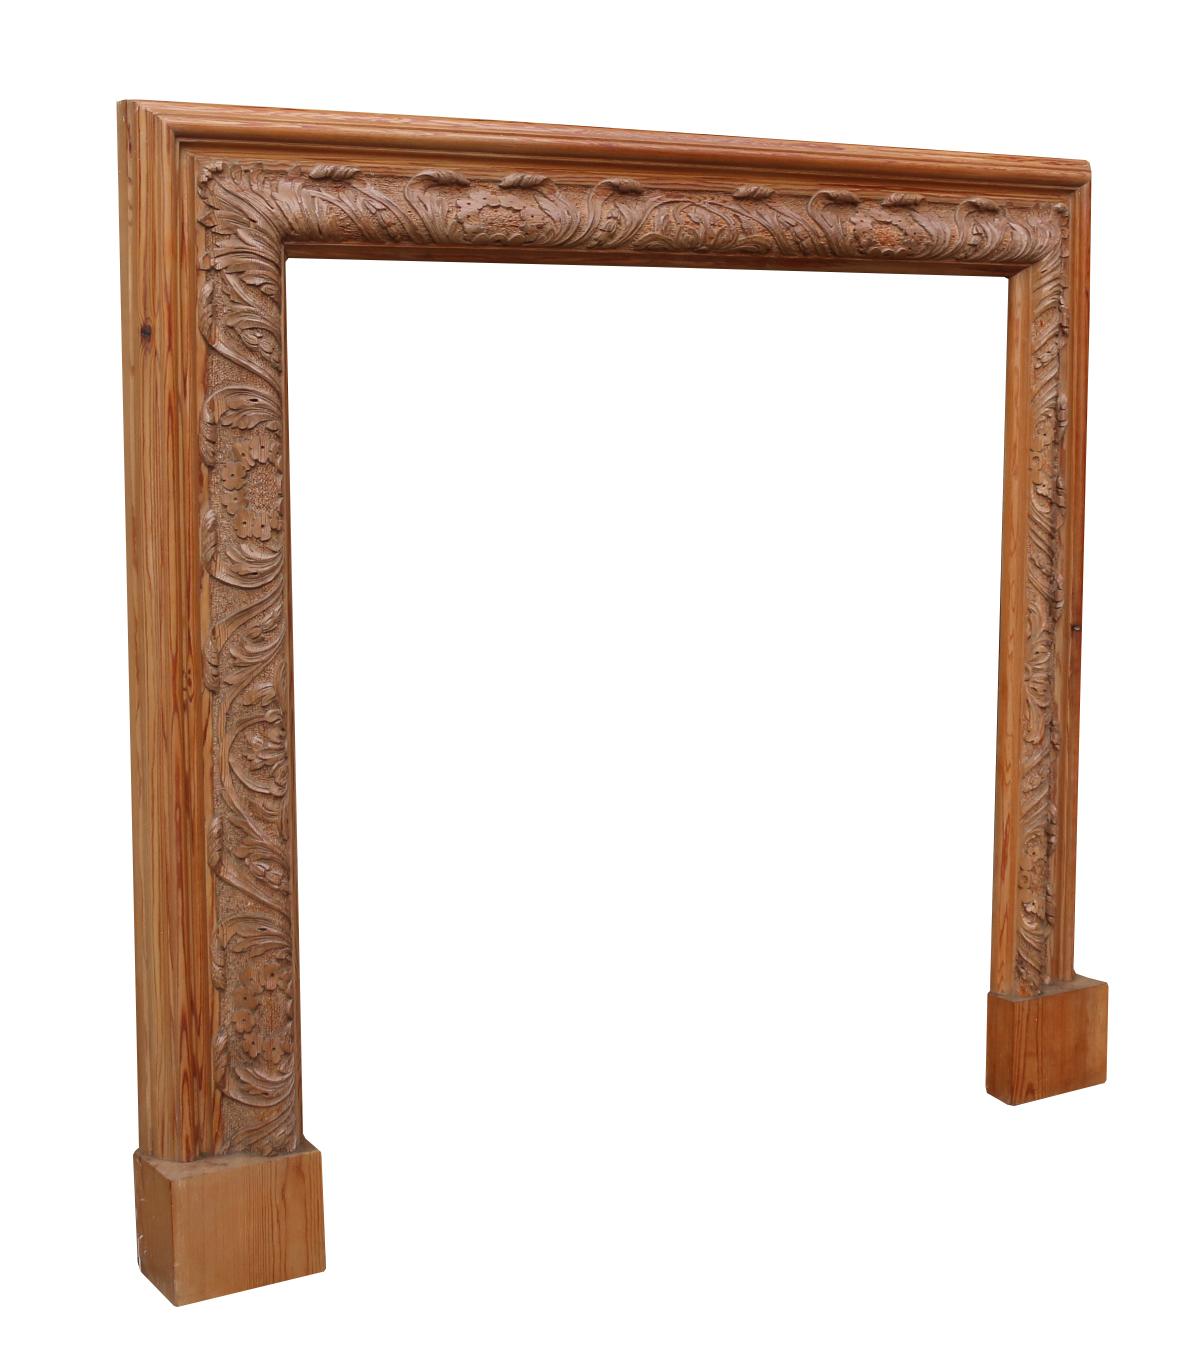 Reclaimed Carved Pine Bolection Fire Mantel In Good Condition For Sale In Wormelow, Herefordshire